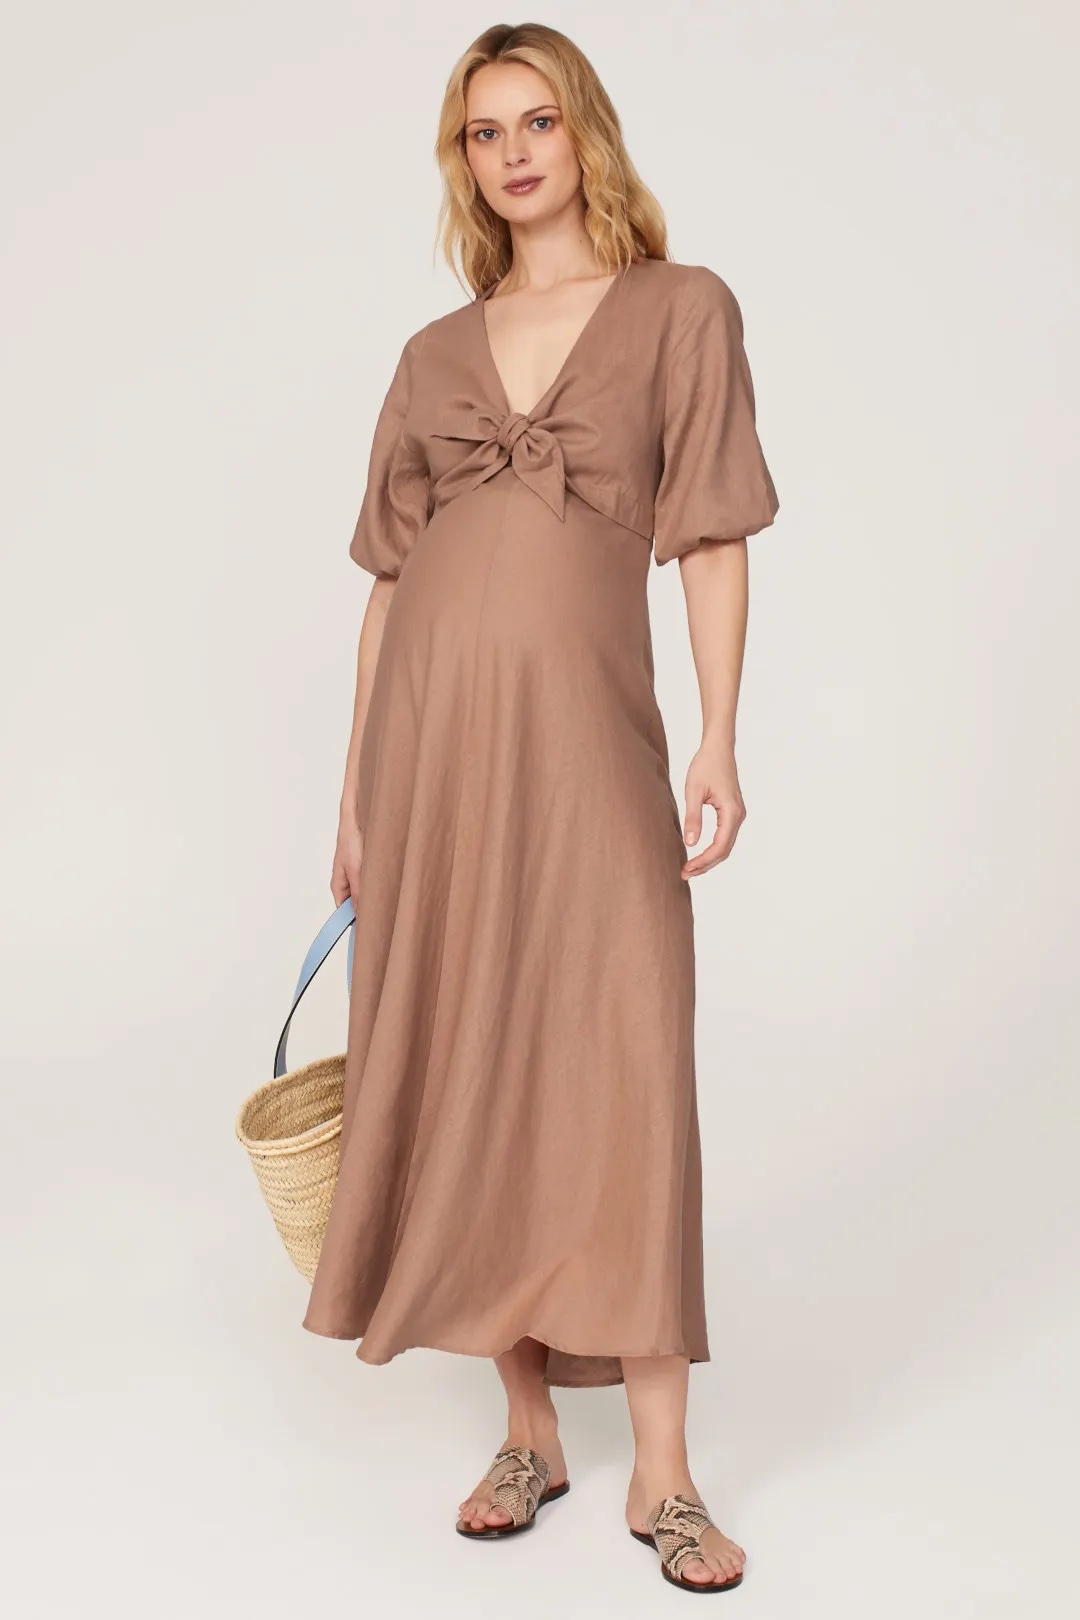 A pregnant woman in a tan long dress with flutter sleeves and bow tie front.